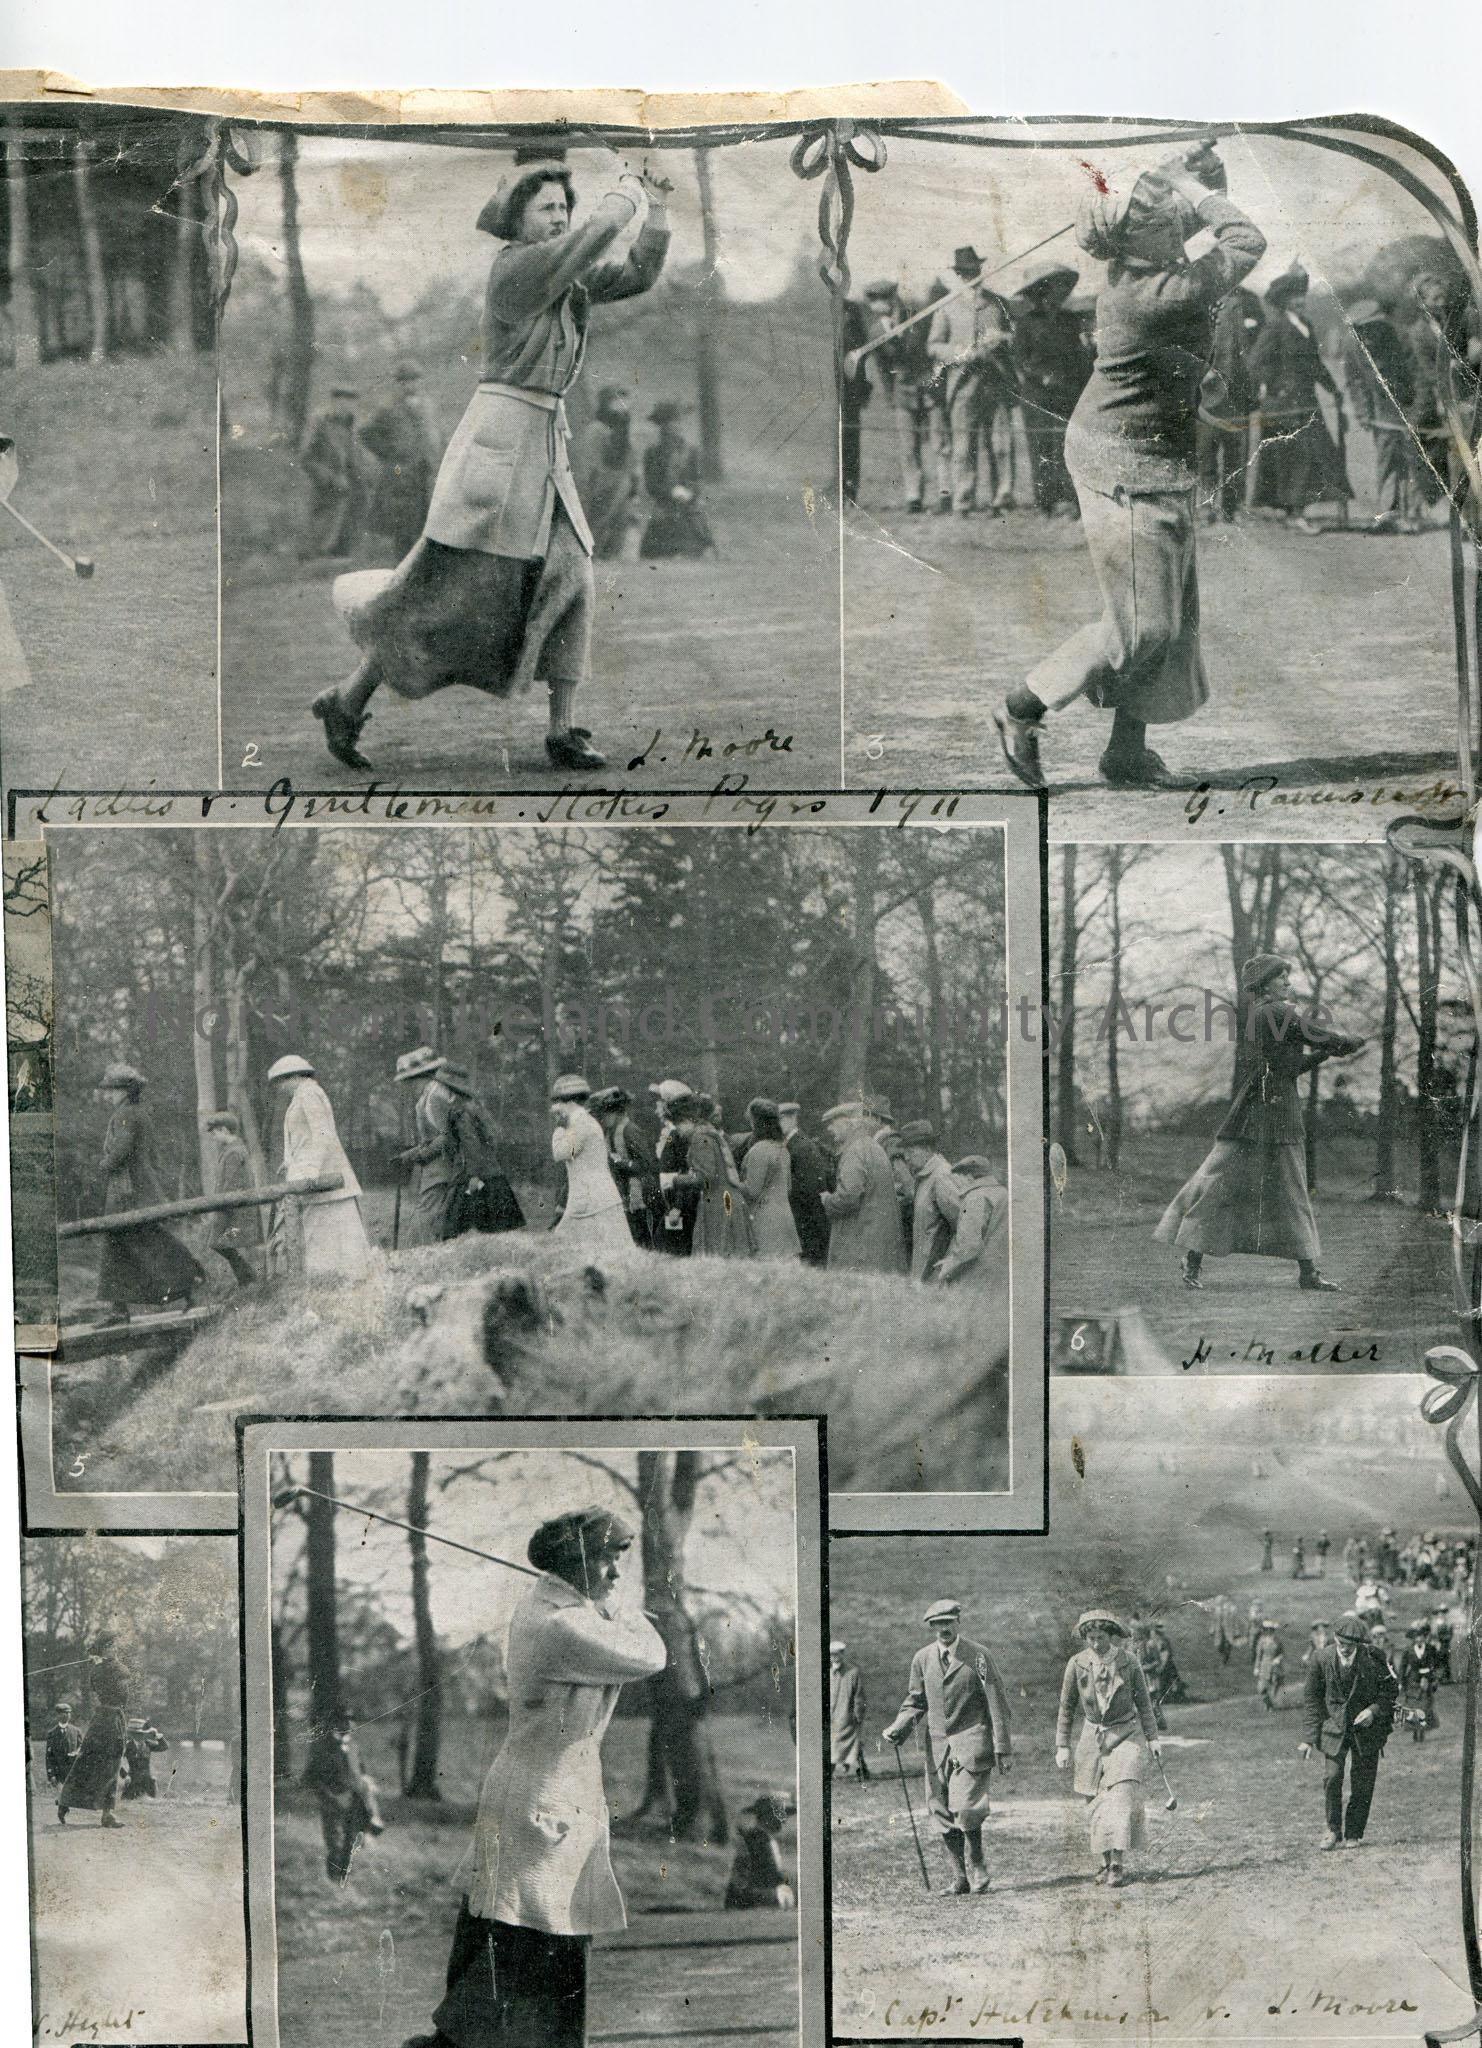 Collage of images cut out from newspaper re golf. ‘Ladies v Gentlemen, Stokes Poges 1911’. Images of women playing golf. images captioned in ink, ‘L. …